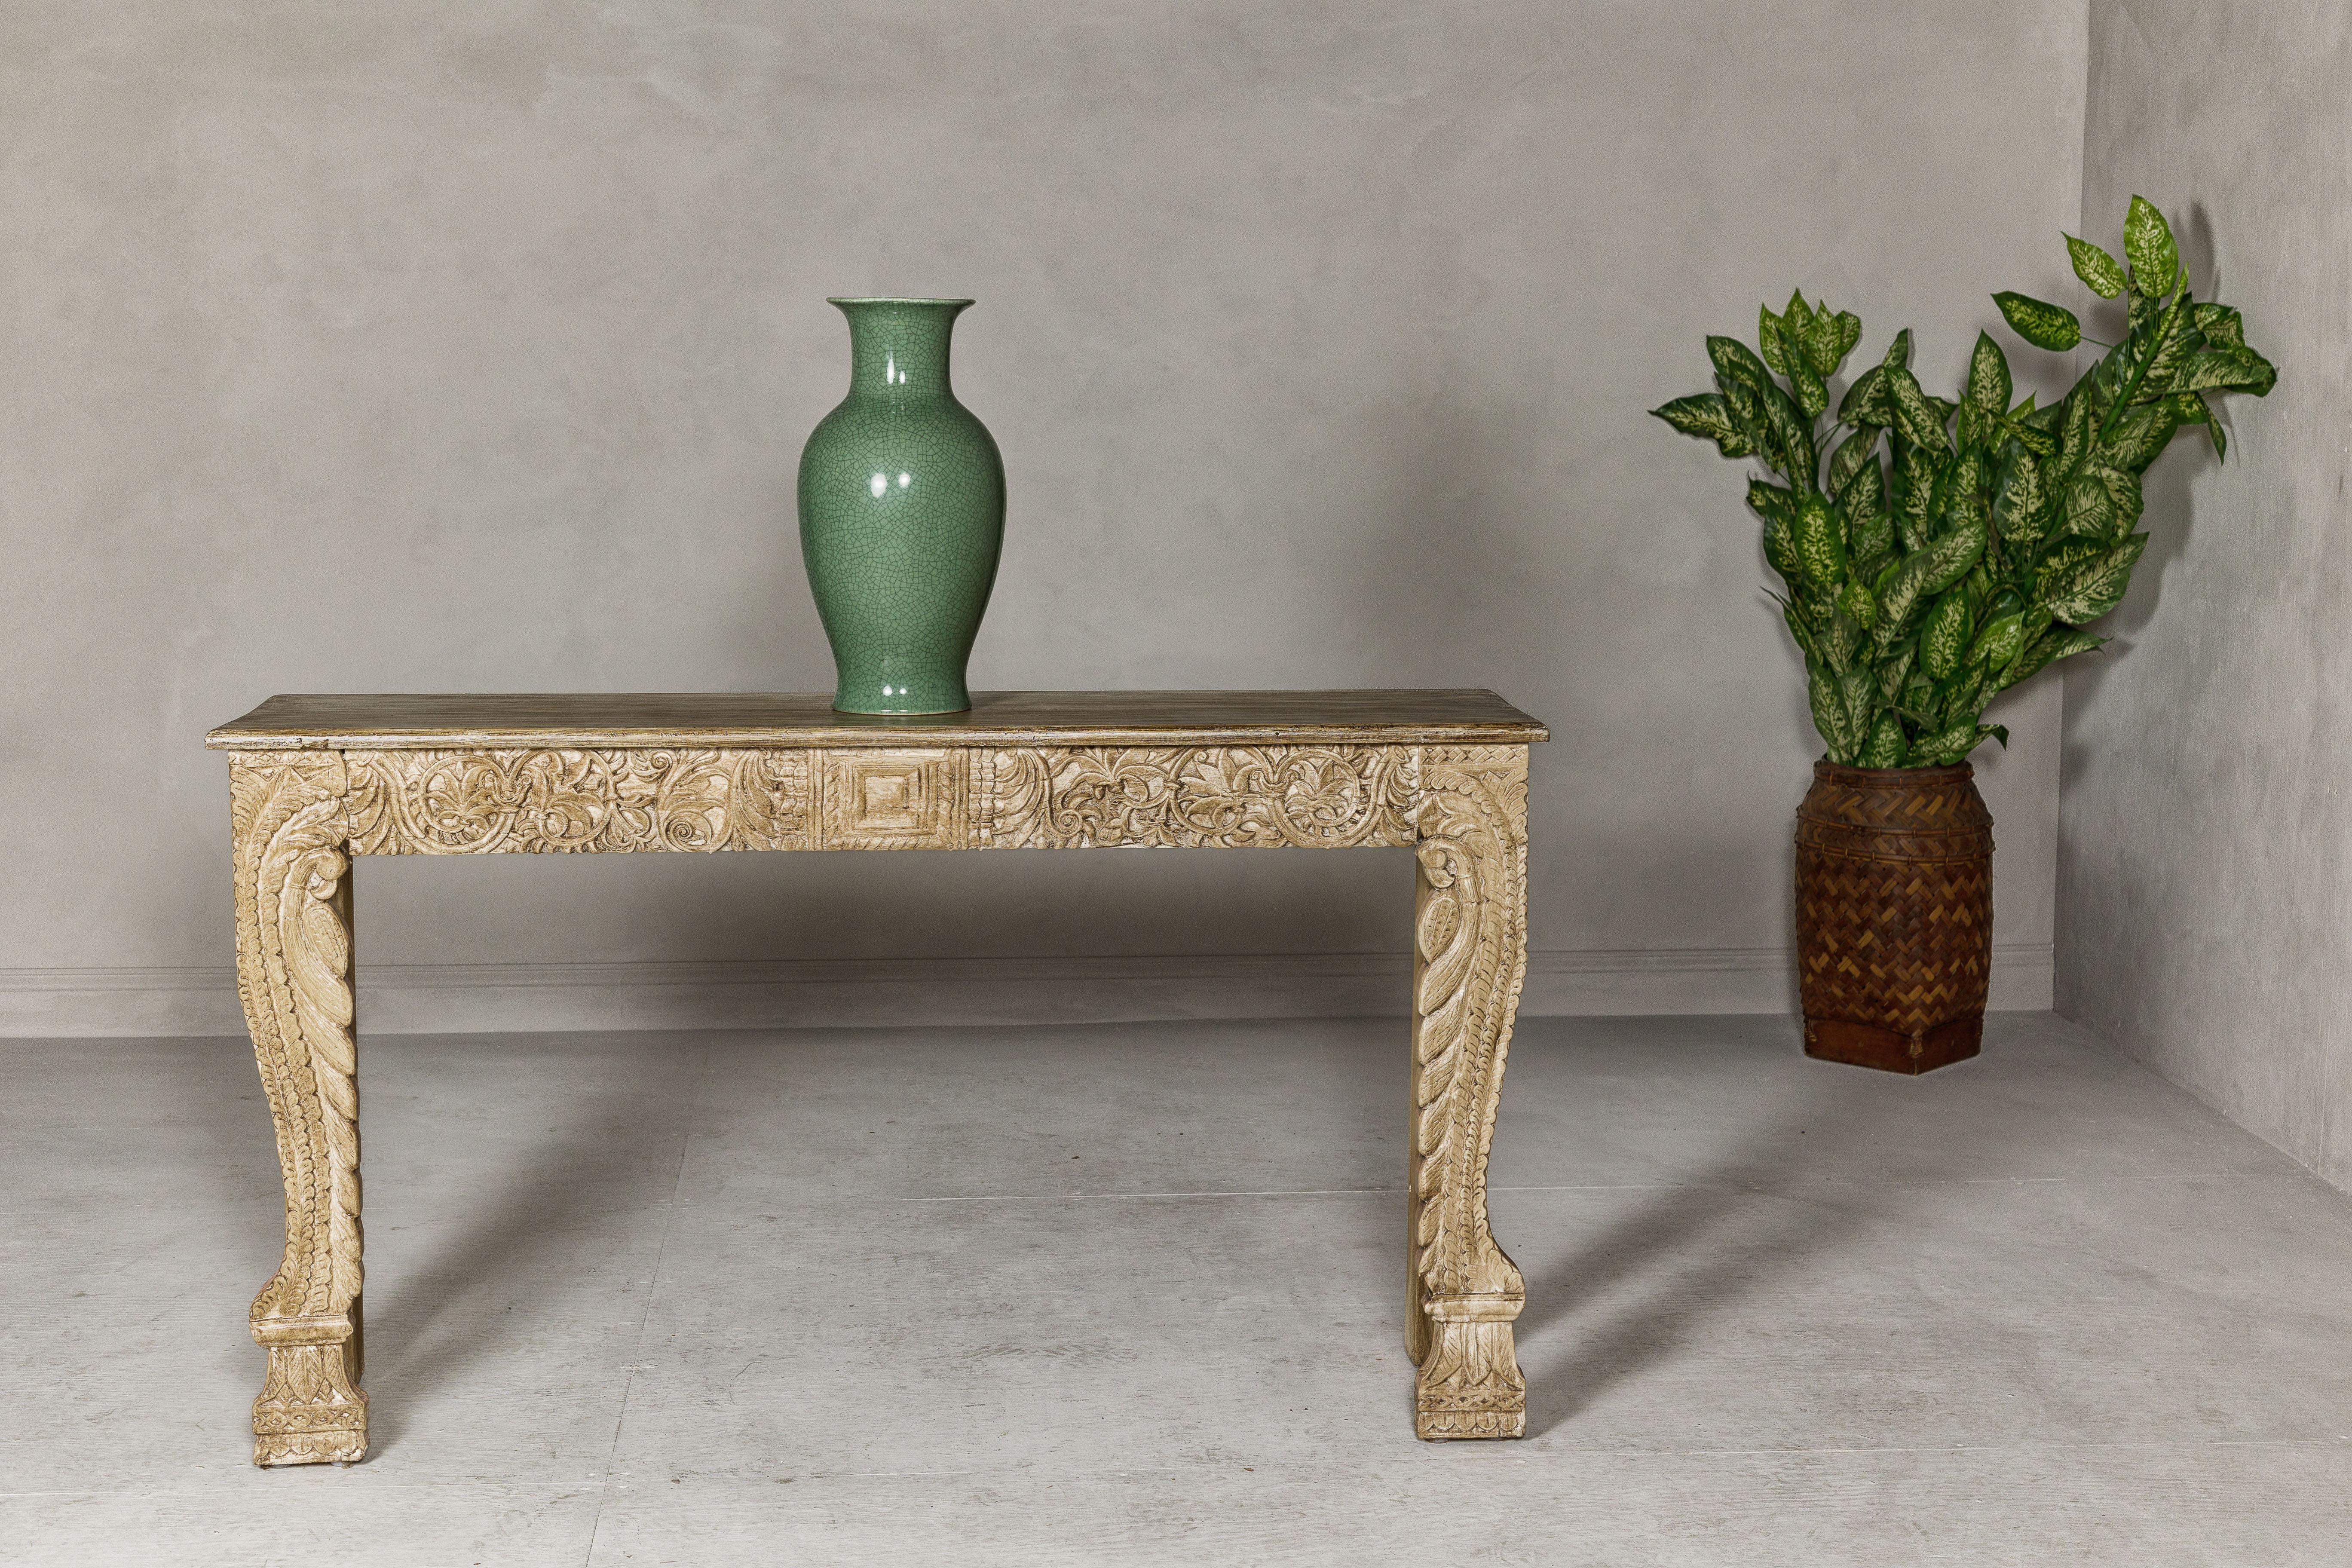 A Mughal style painted console table with carved apron and legs. This Mughal style painted console table captivates with its exquisite craftsmanship, featuring an intricately carved apron and legs adorned with abundant foliage motifs. The table